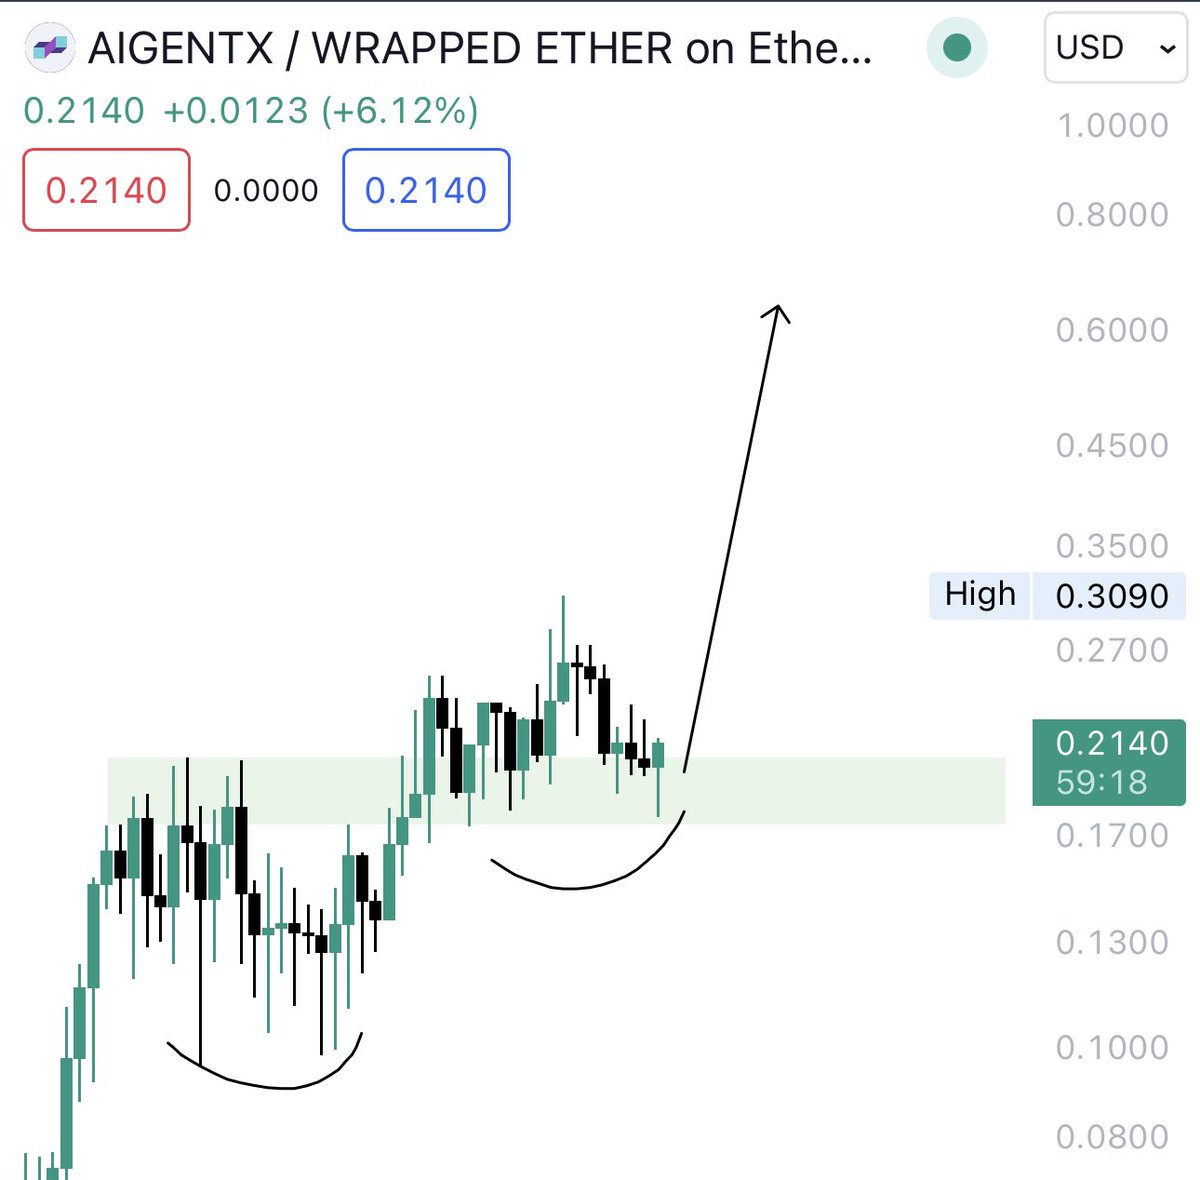 Feels bad to see sellers getting rekt every single time in $AIX 💎 The jeets must be sacrificed. The whales add more and more. 100M in Q1 🤝